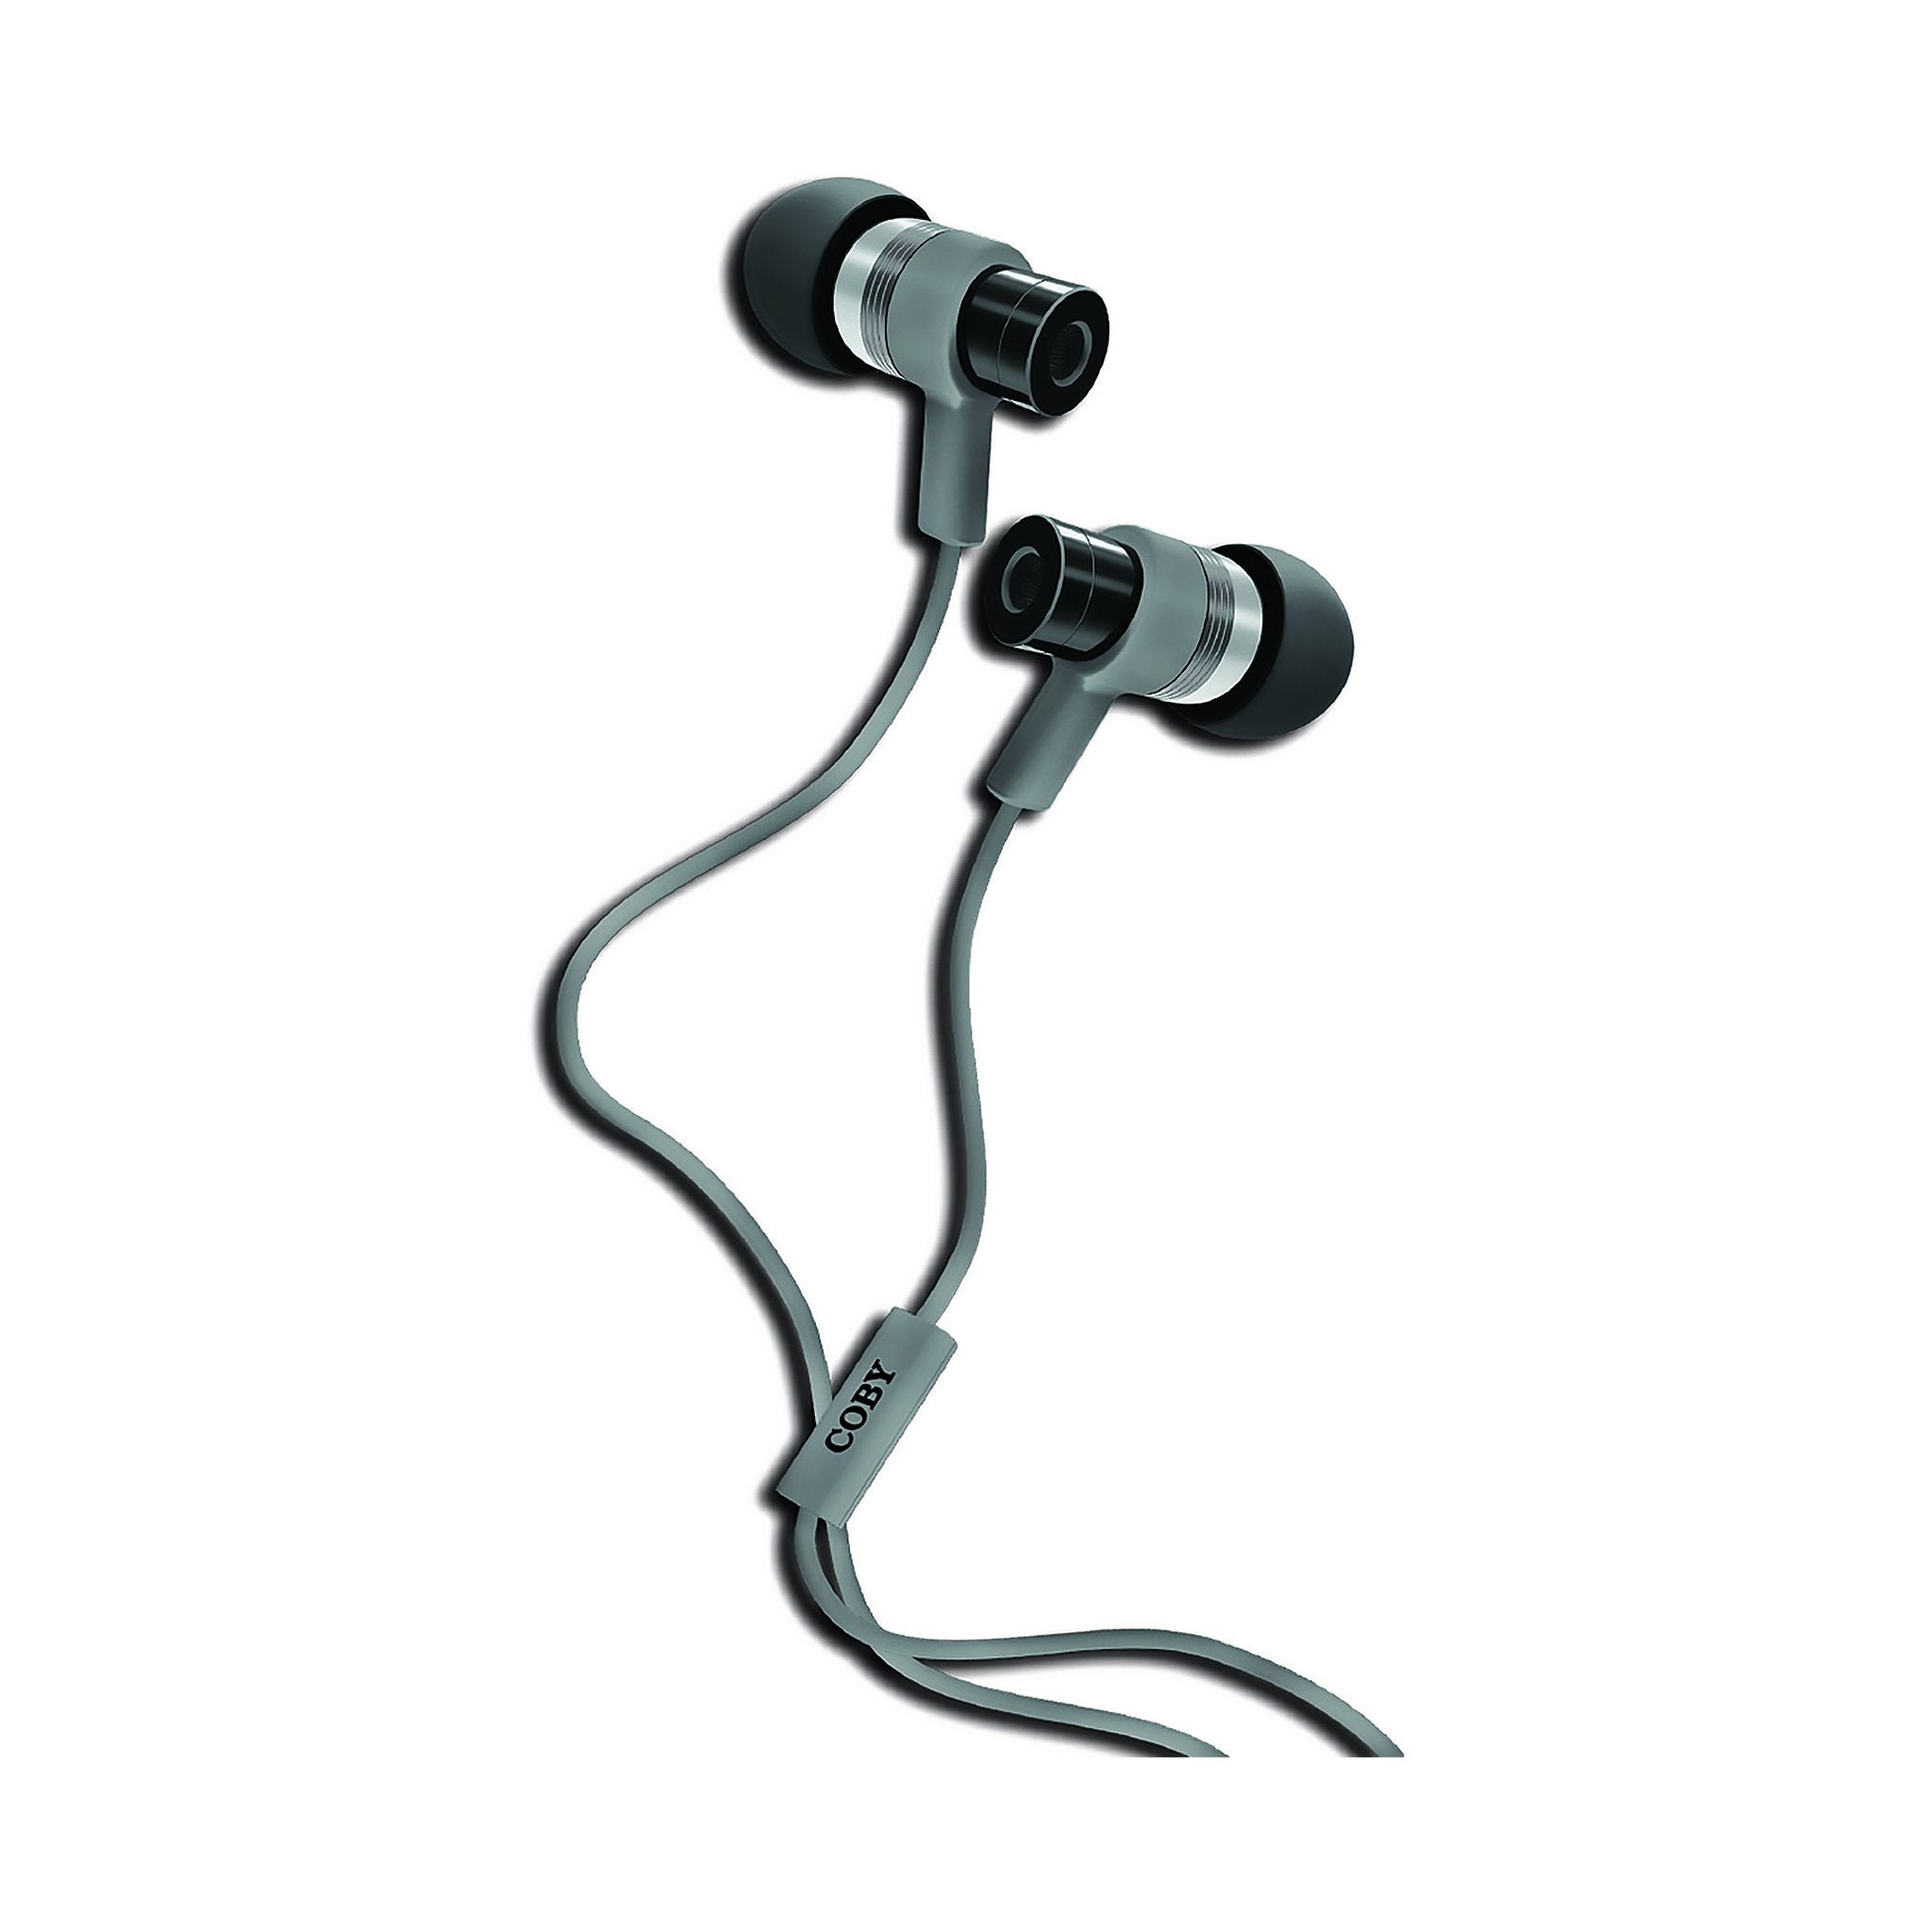 Fusion Metal Stereo Earbuds